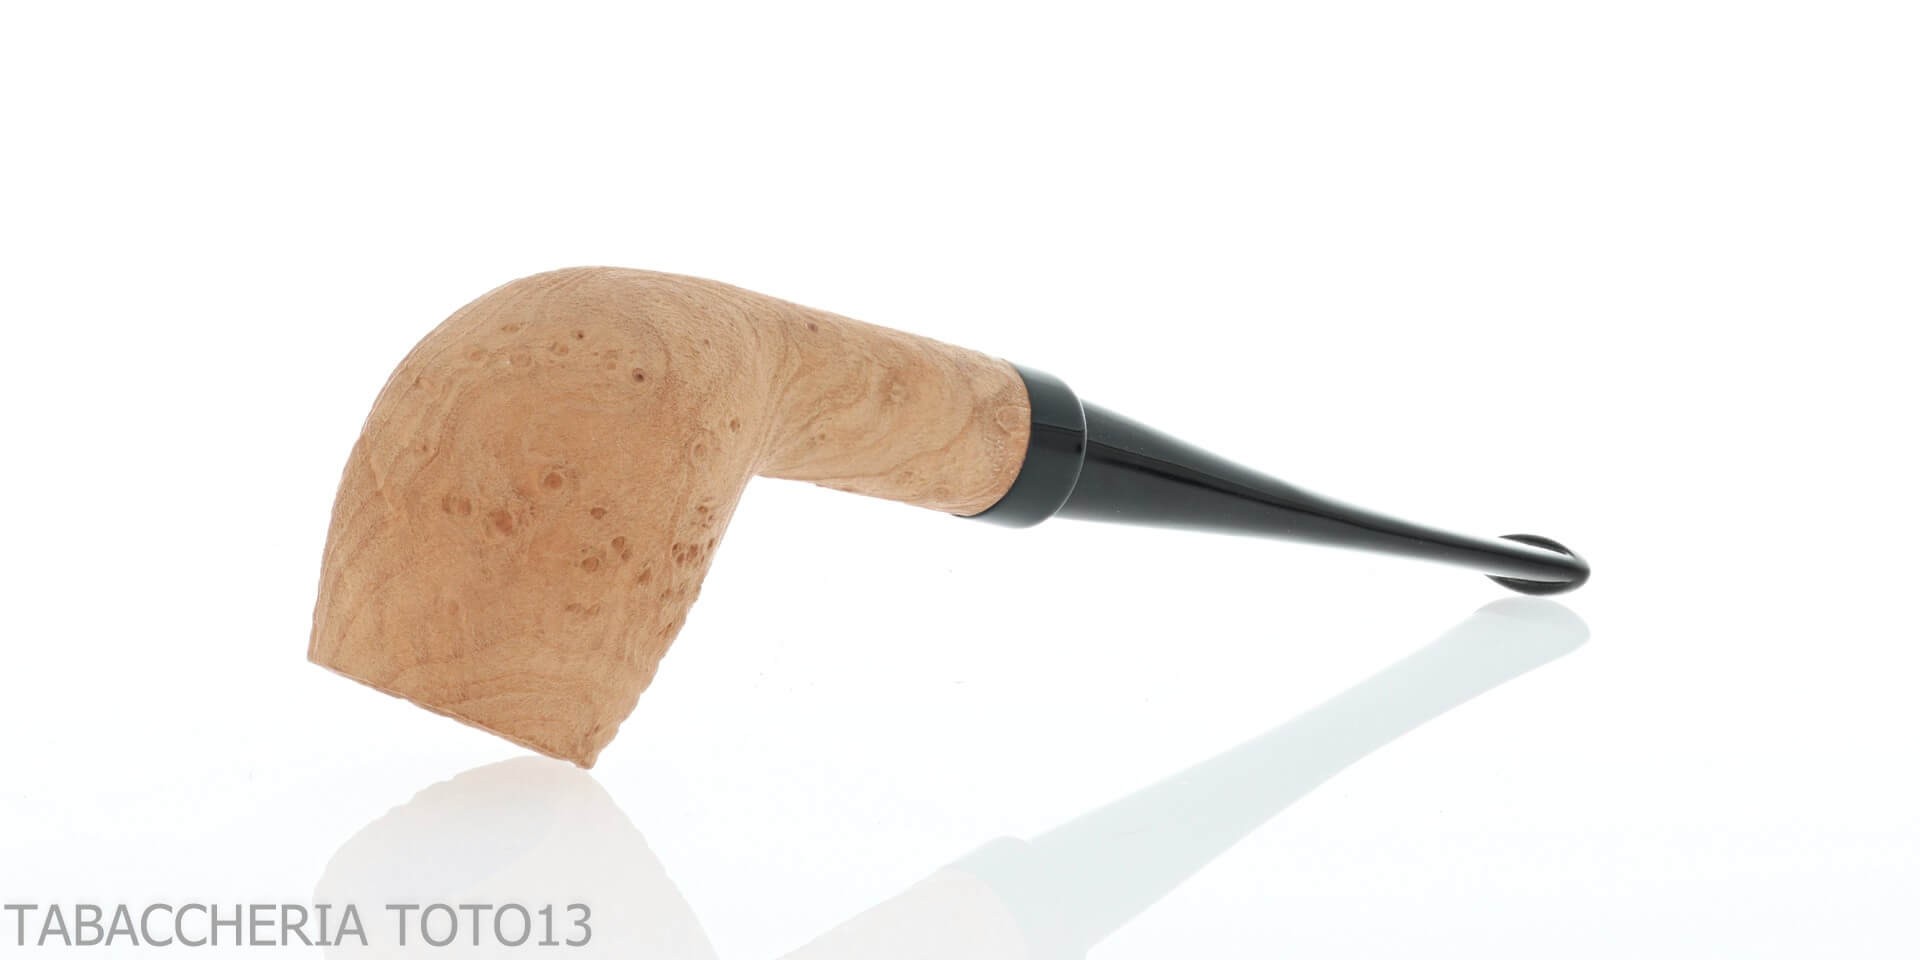 Pipe Arbutus in strawberry tree cutty shape natural sandblasted briar